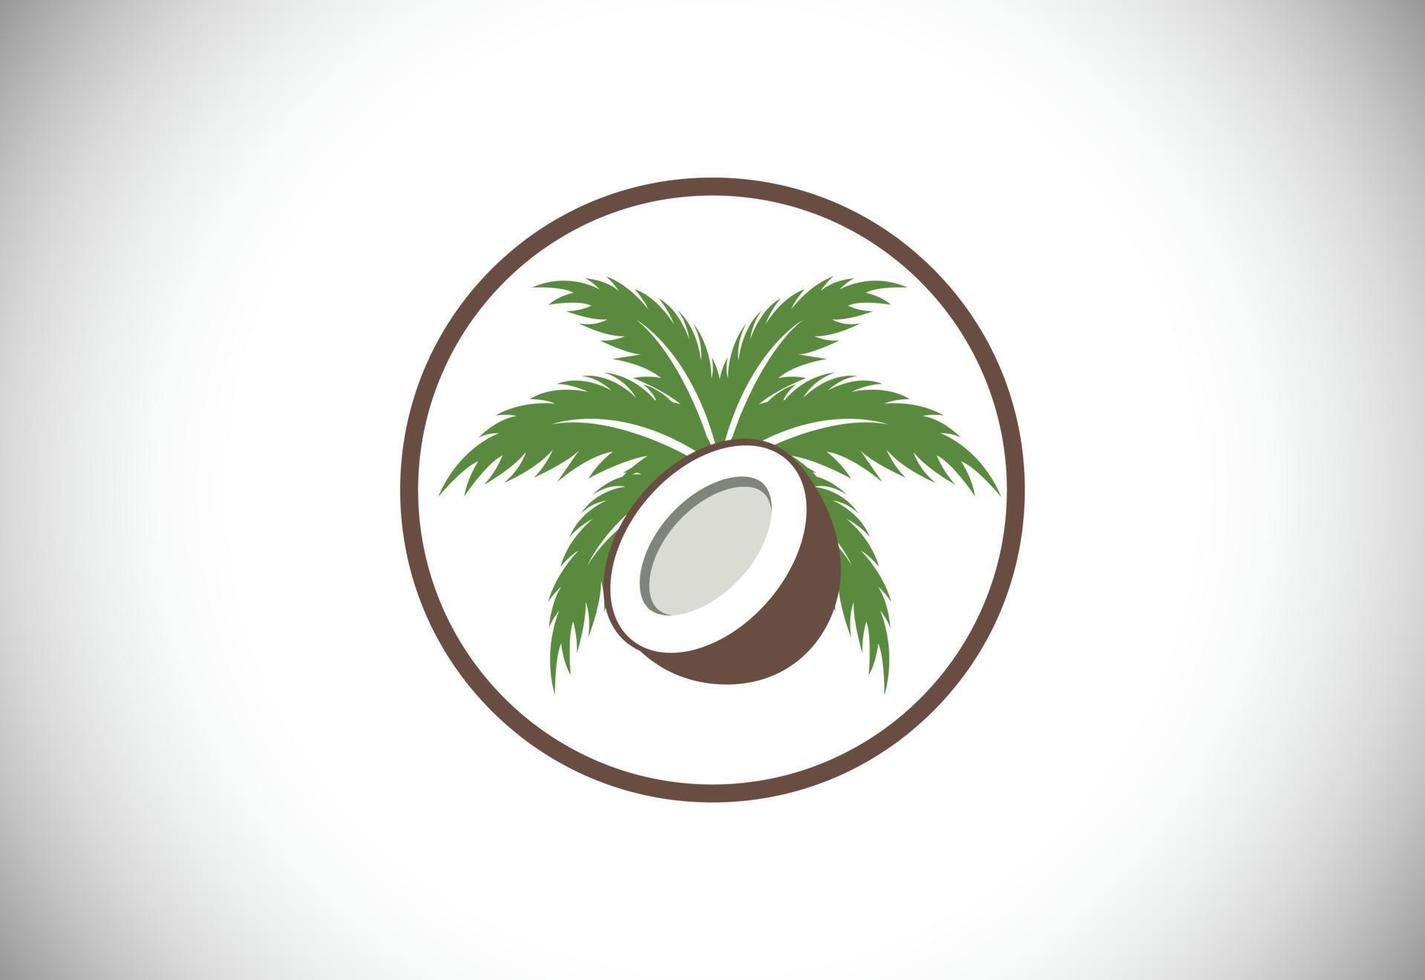 Creative modern coconut with leaves sign logo design template vector